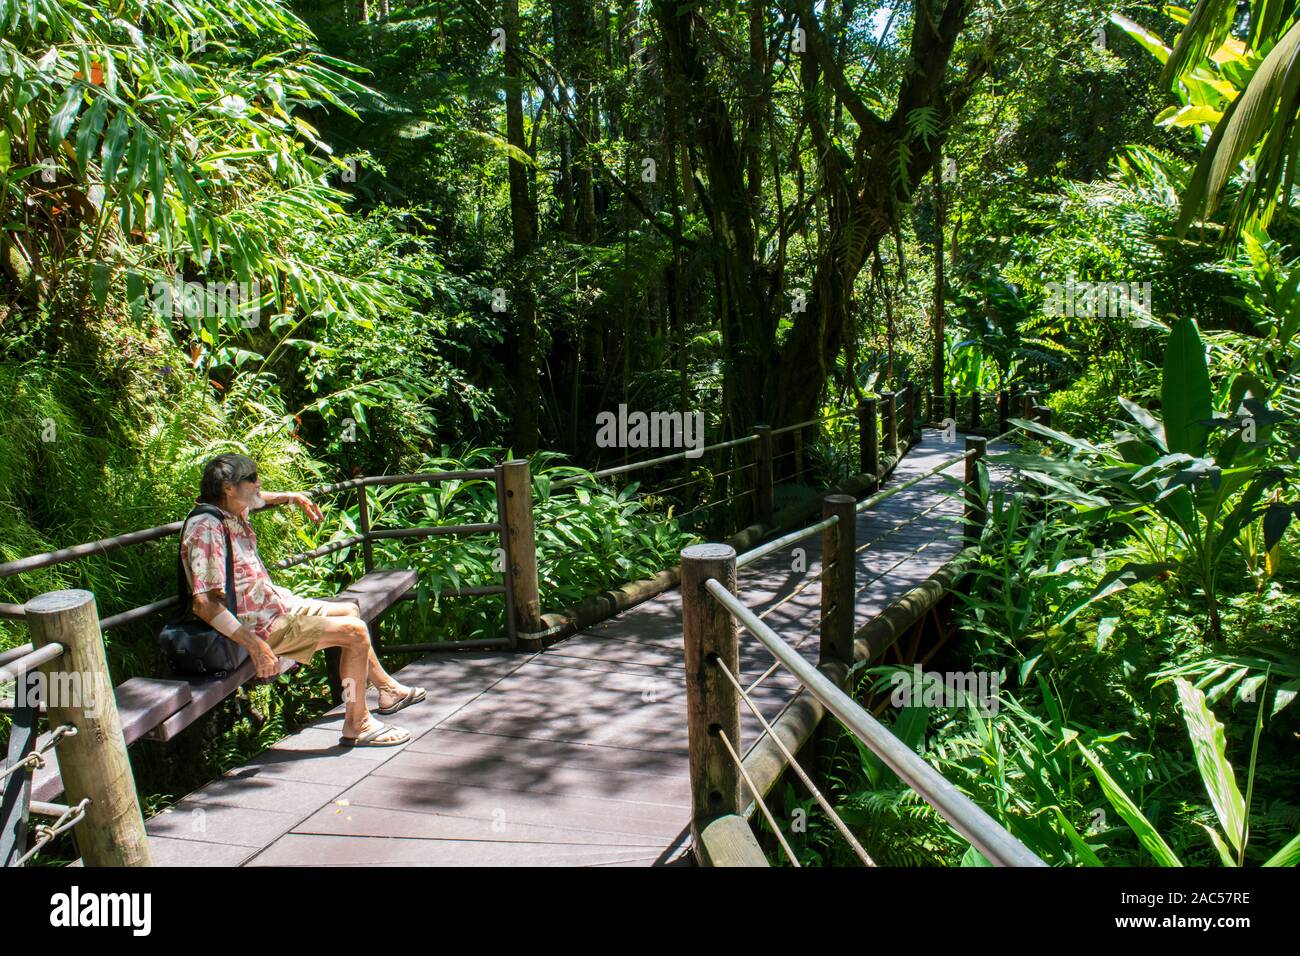 A visitor relaxes in the shade on the boardwalk at Hawaii Tropical Botanical Garden in Papa'ikou near Hilo, Big Island of Hawai'i. Stock Photo